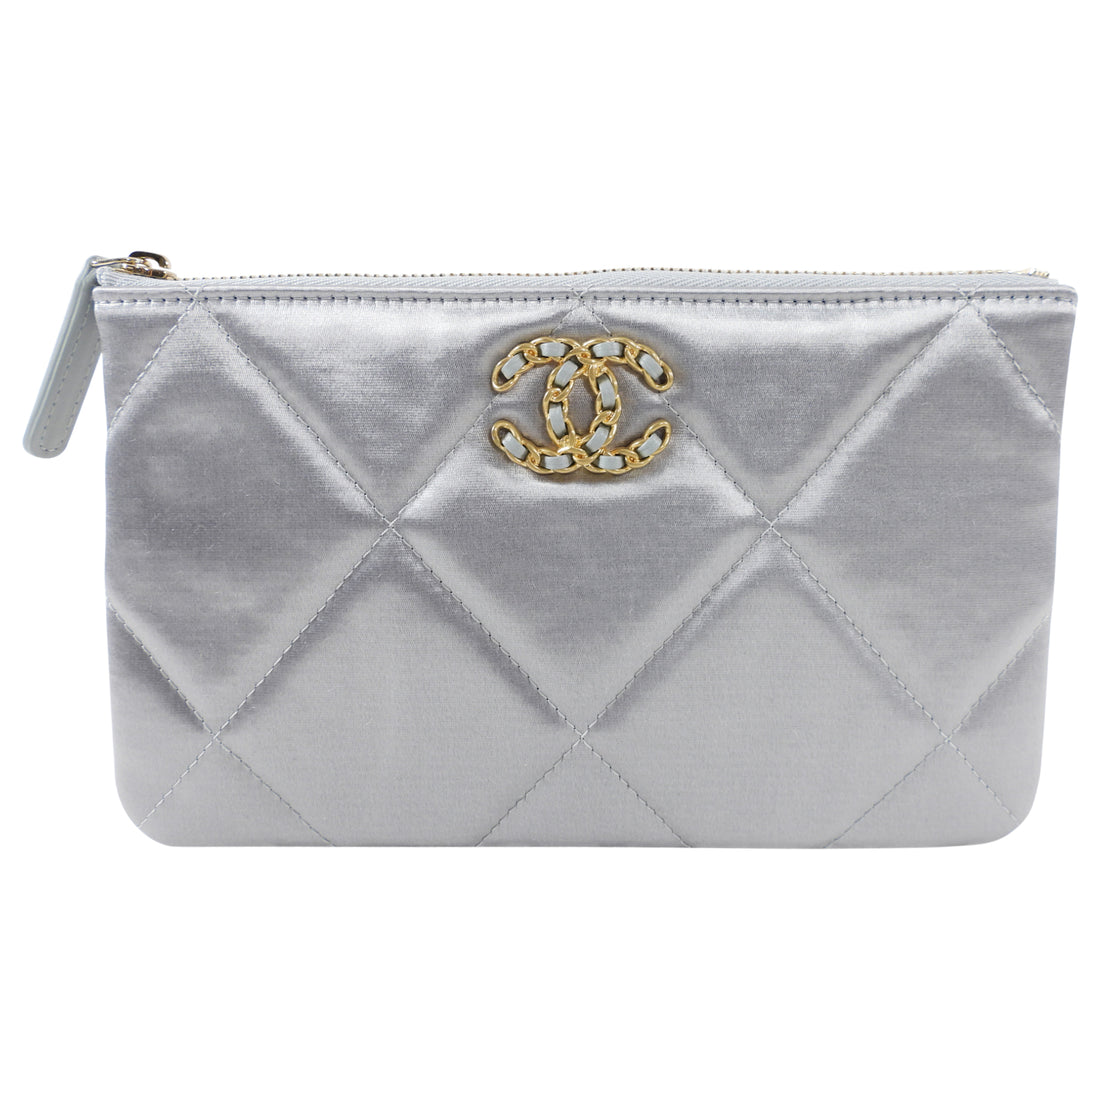 Chanel 19 O Case Small Light Grey Satin - Touched Vintage